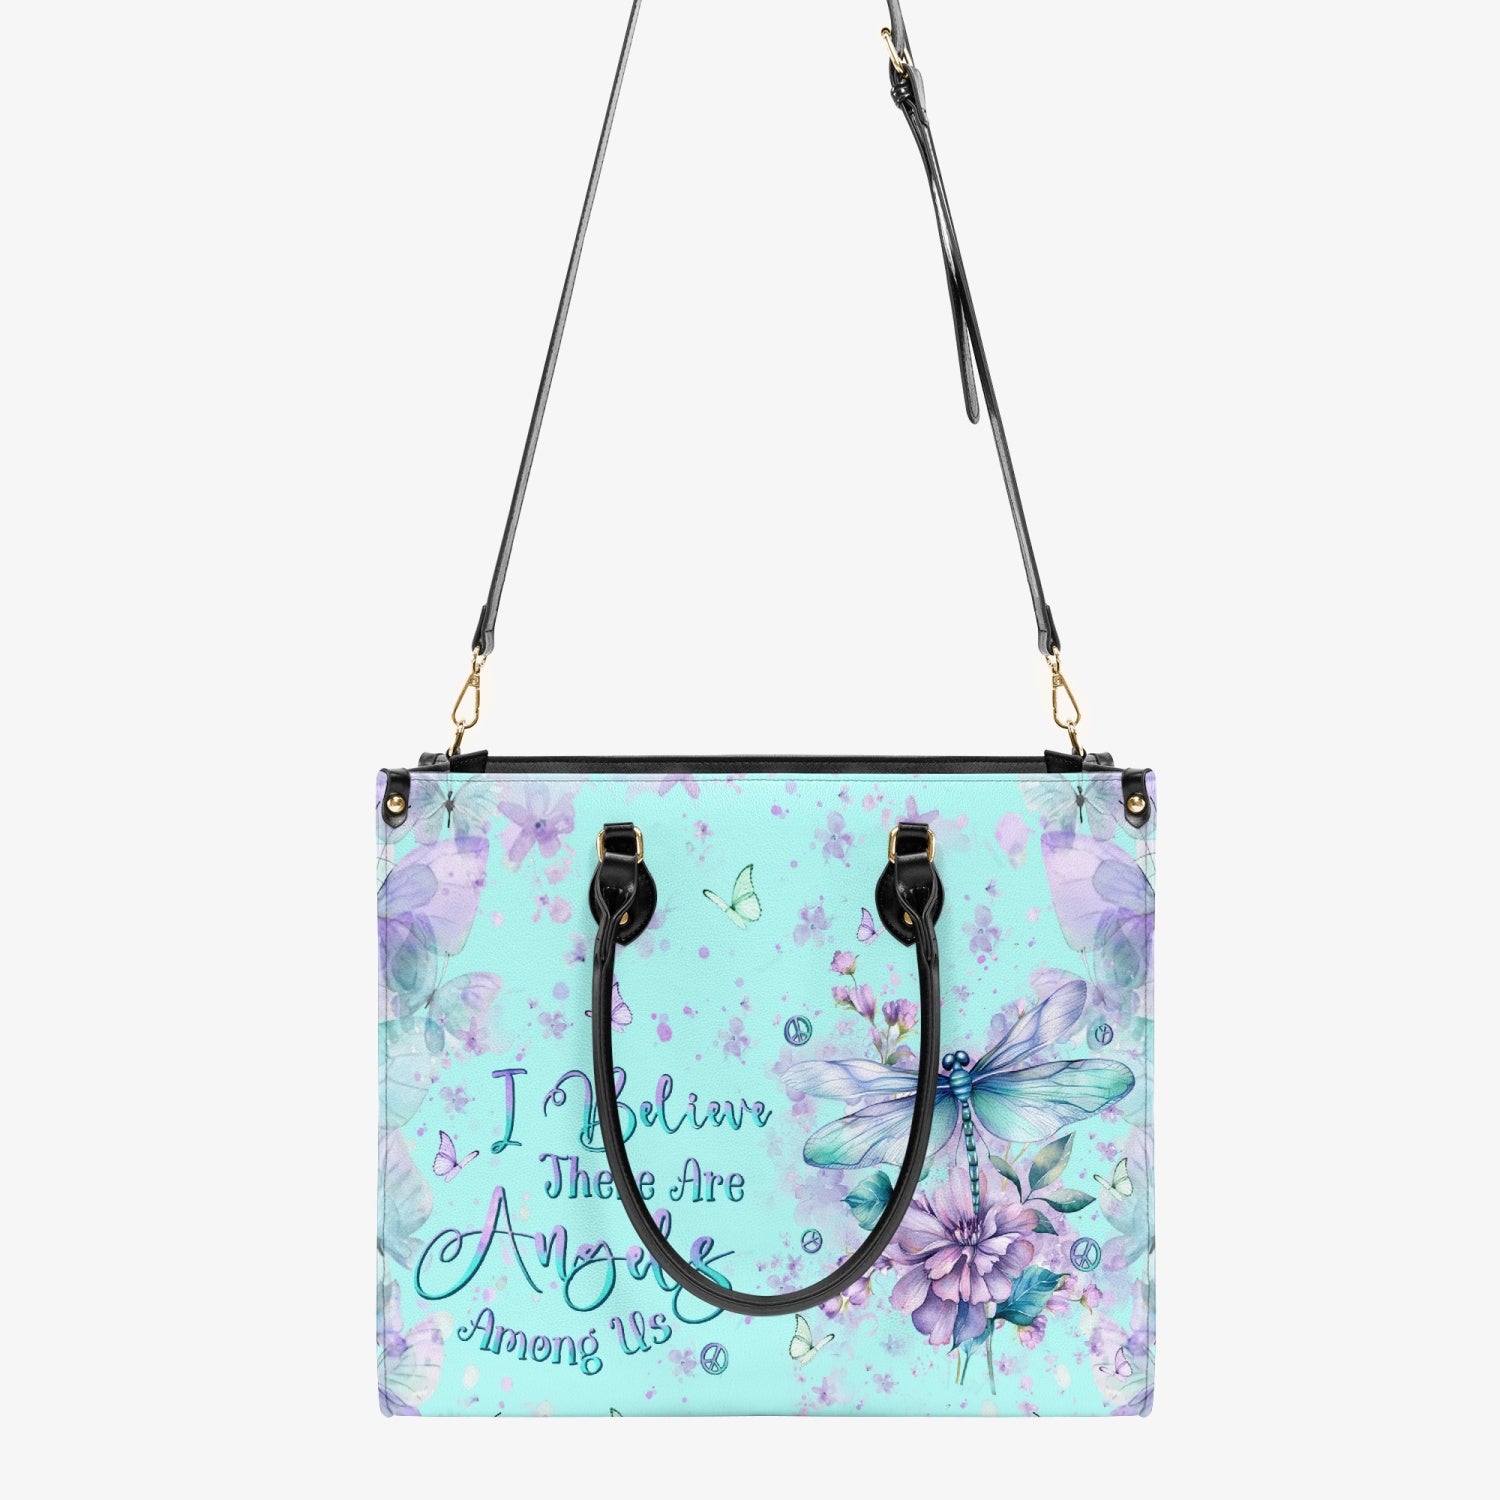 I BELIEVE THERE ARE ANGELS AMONG US LEATHER HANDBAG - YHLN2603243